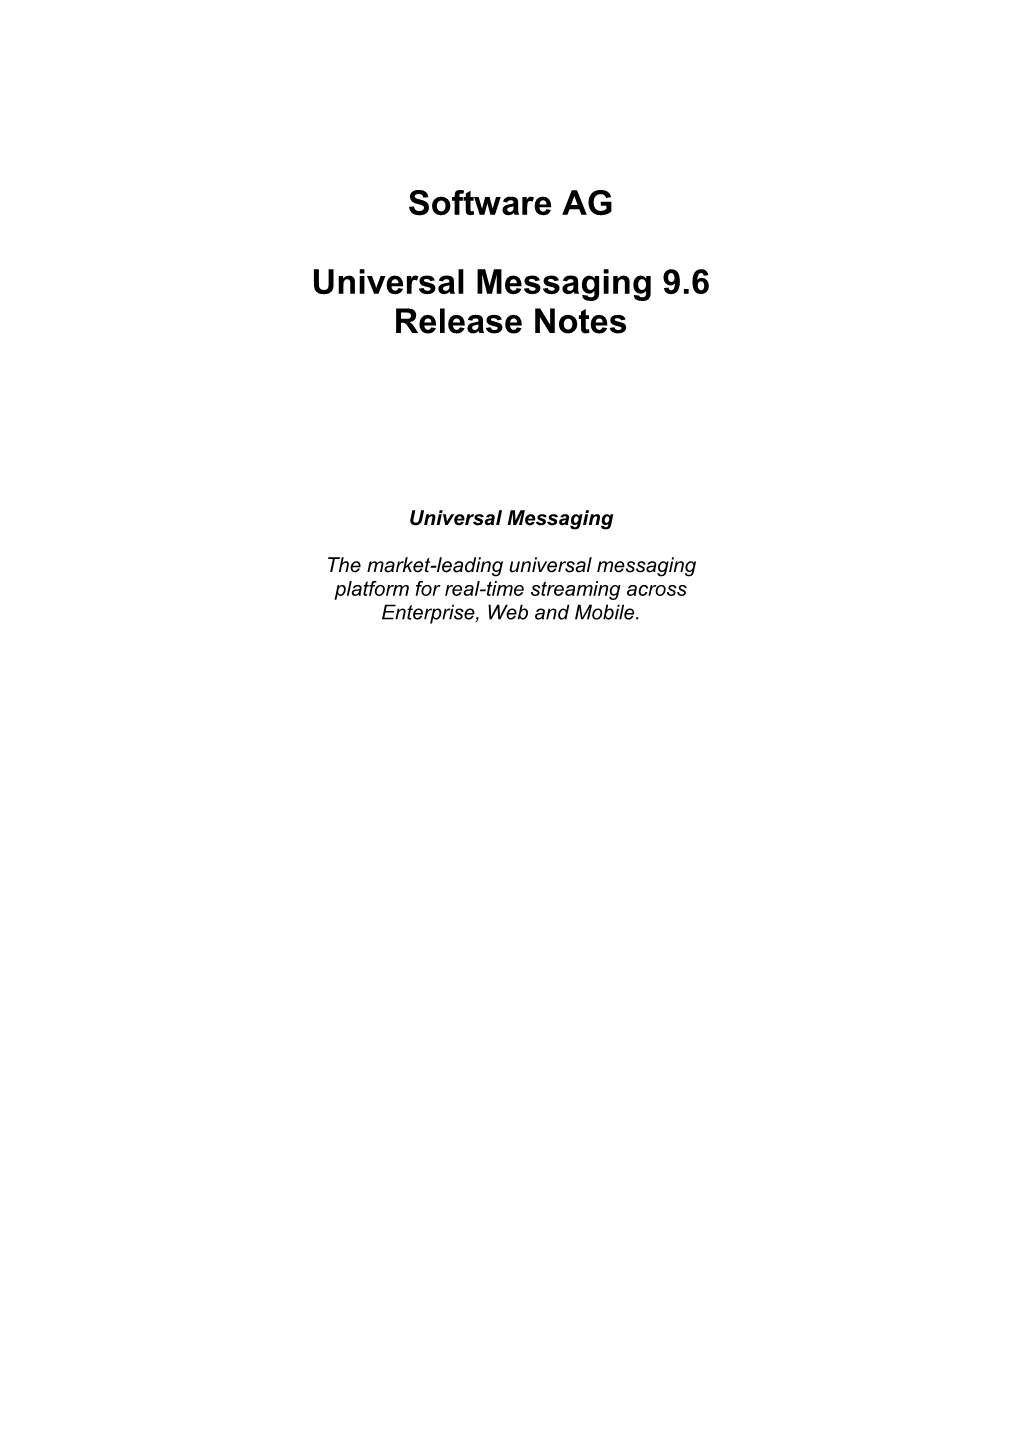 Software AG Universal Messaging 9.6 Release Notes